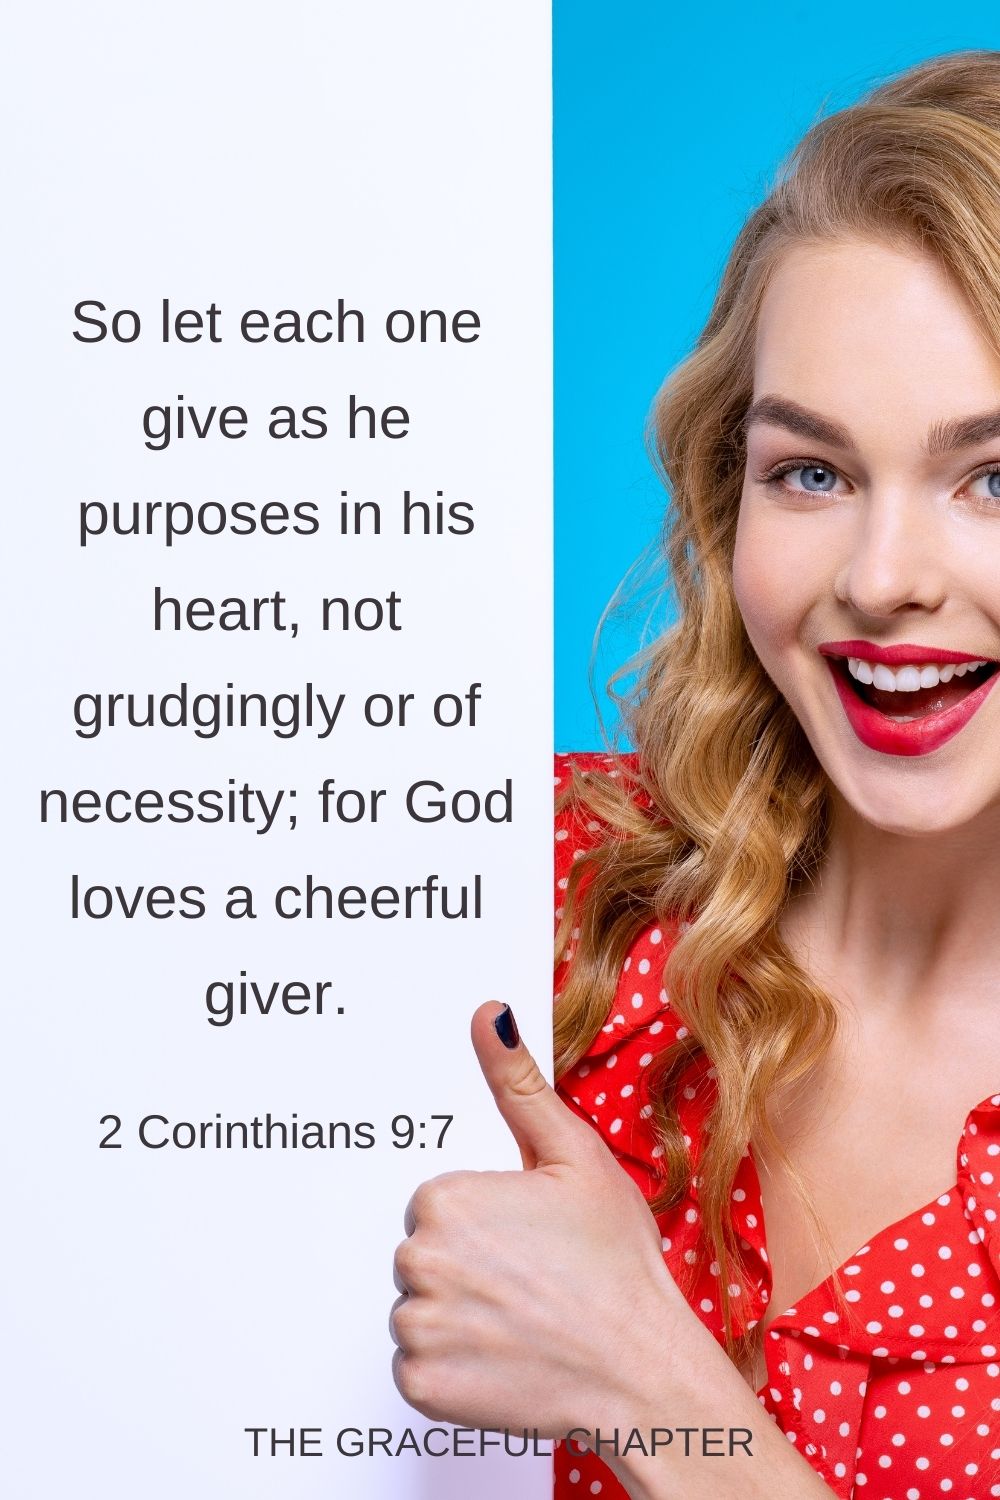 So let each one give as he purposes in his heart, not grudgingly or of necessity; for God loves a cheerful giver. 2 Corinthians 9:7